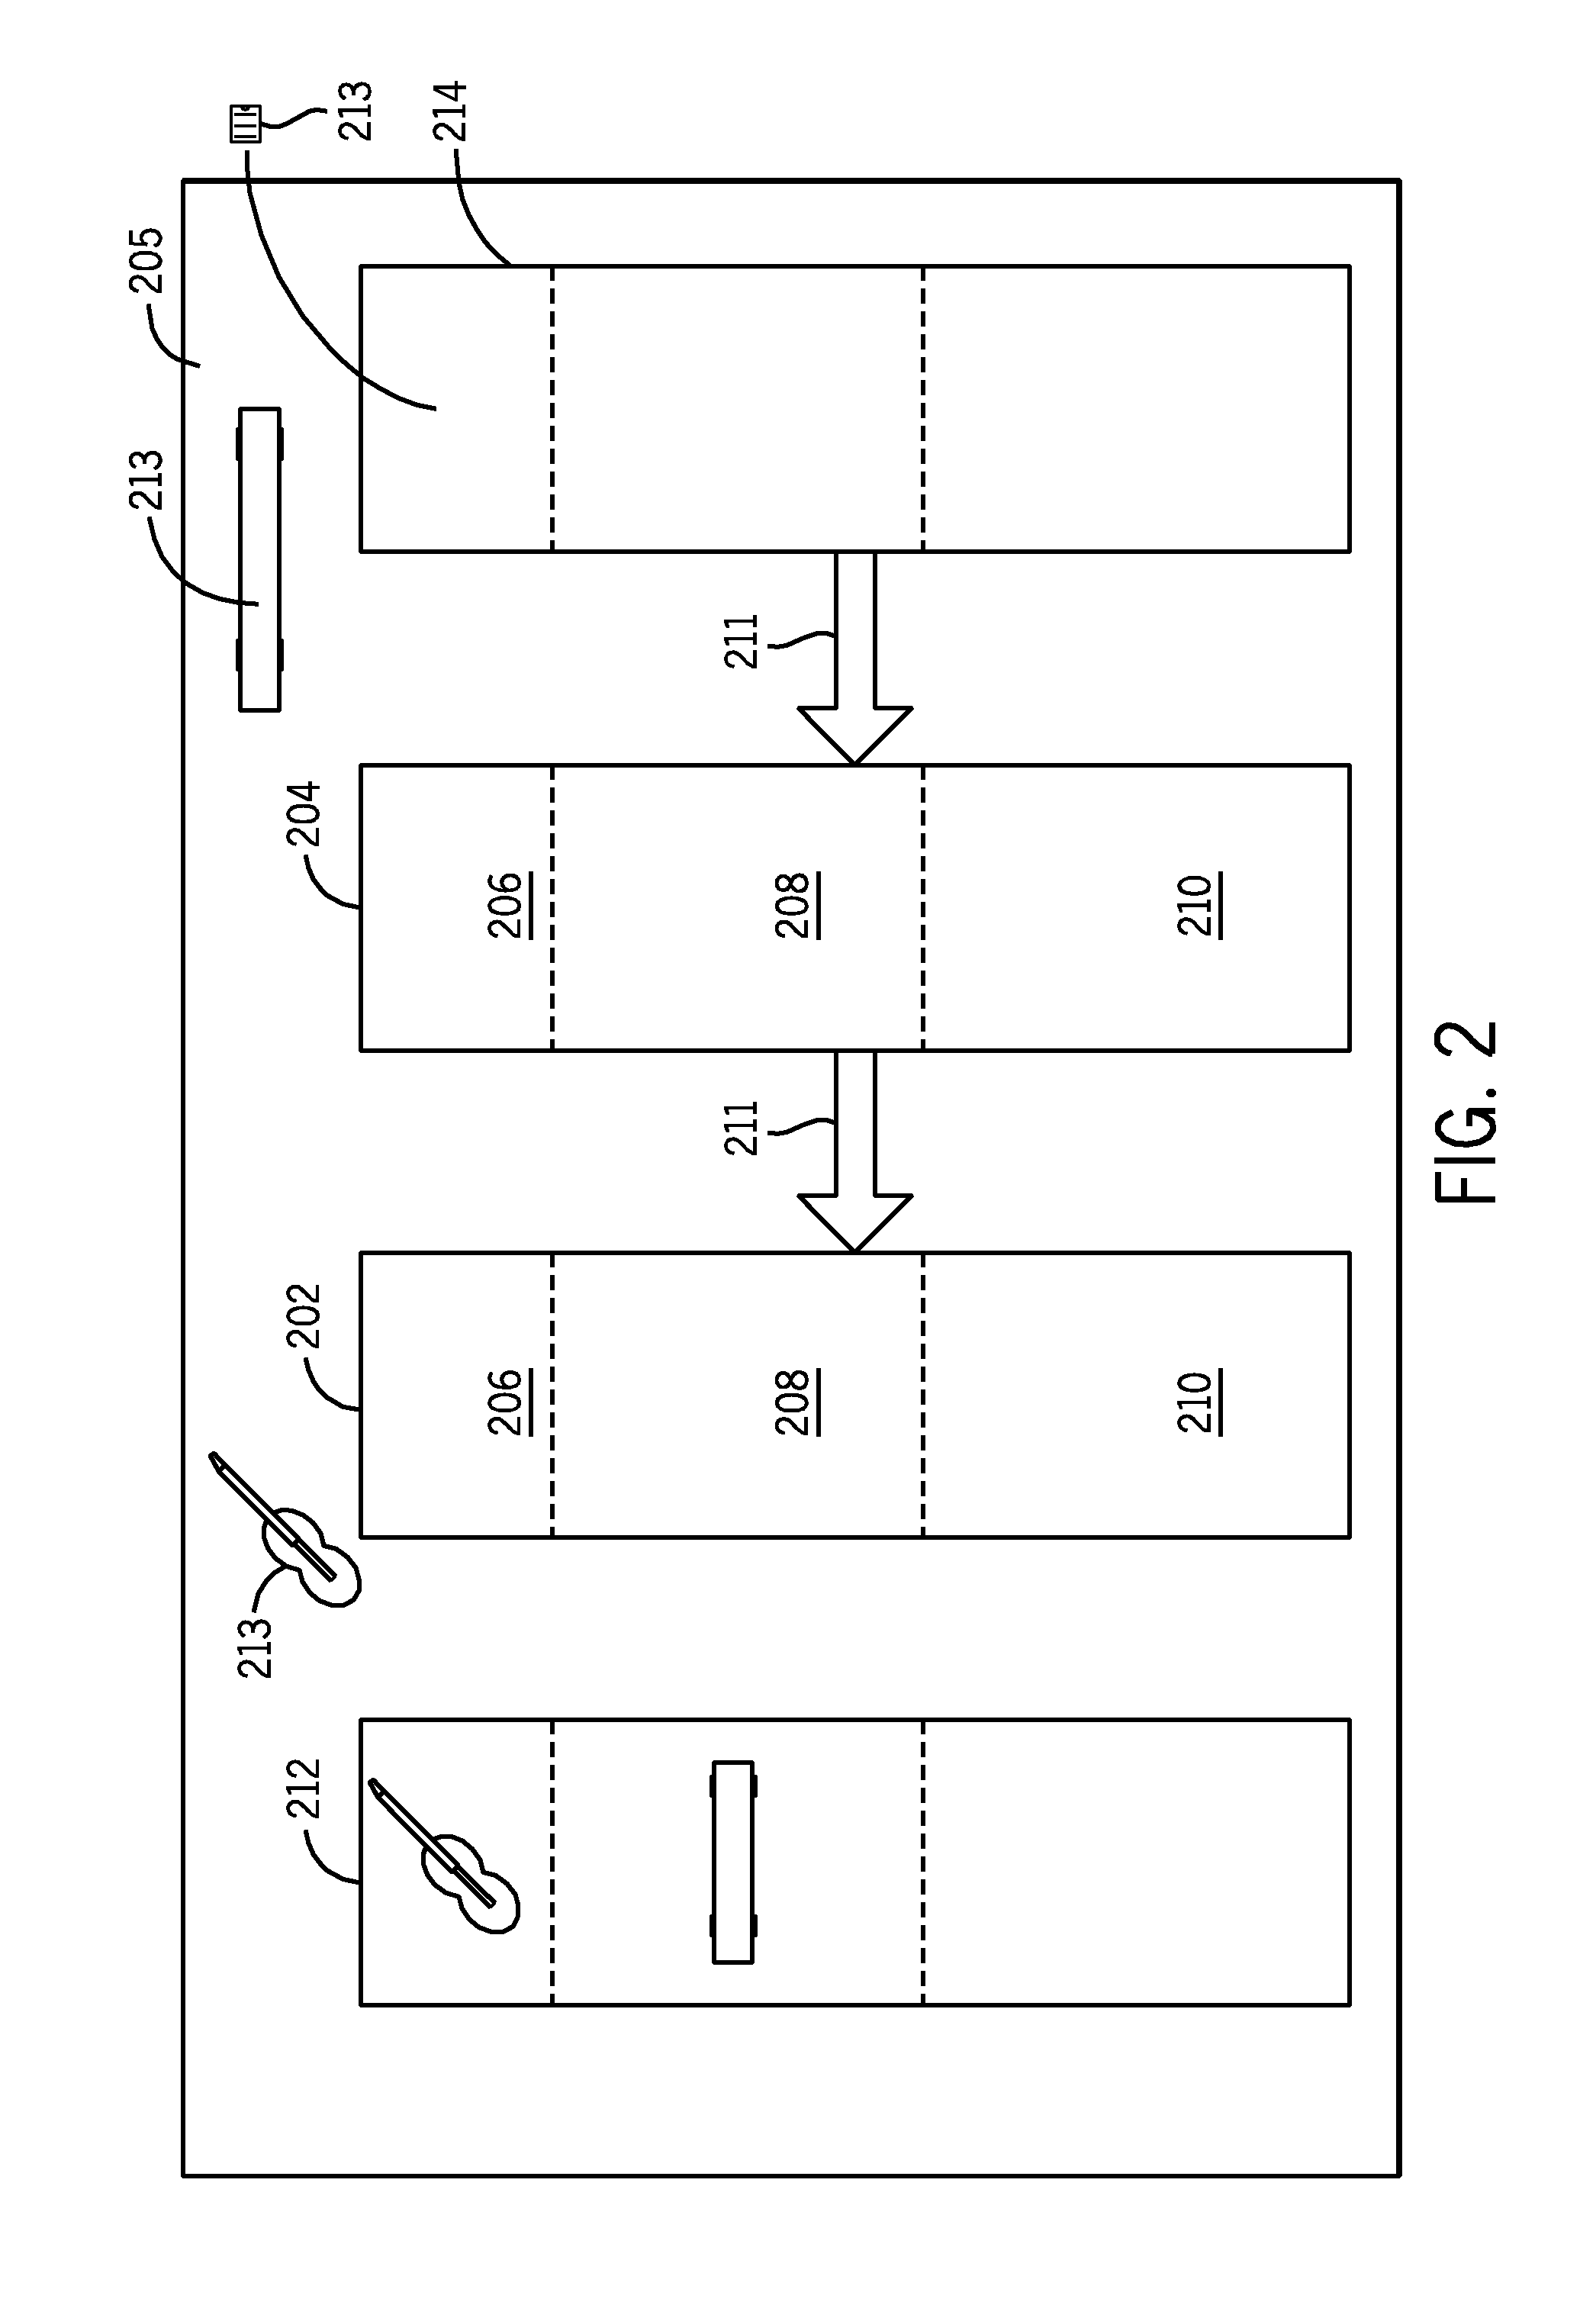 System and method for seamless multimedia assembly